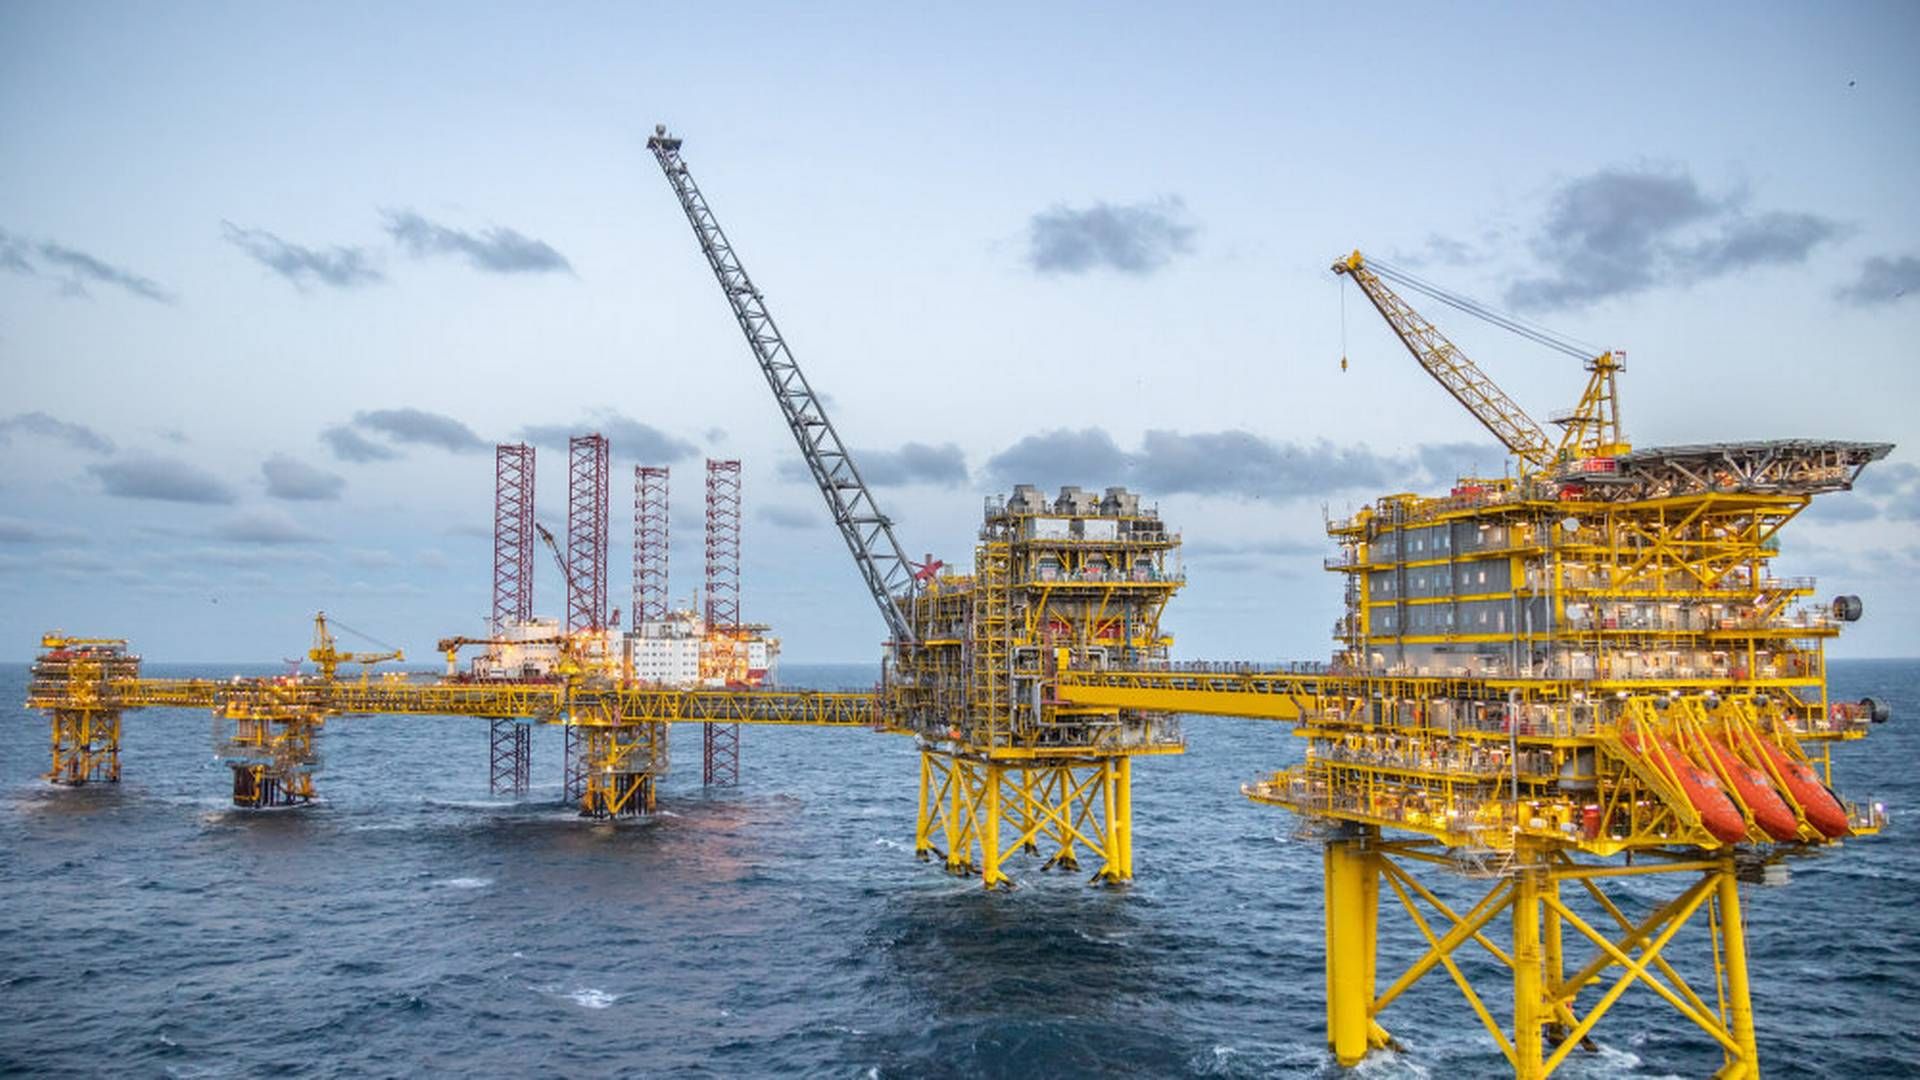 The connection of the Tyra field is one of the reasons why the gas supply in Denmark looks stable. | Photo: Totalenergies/pr